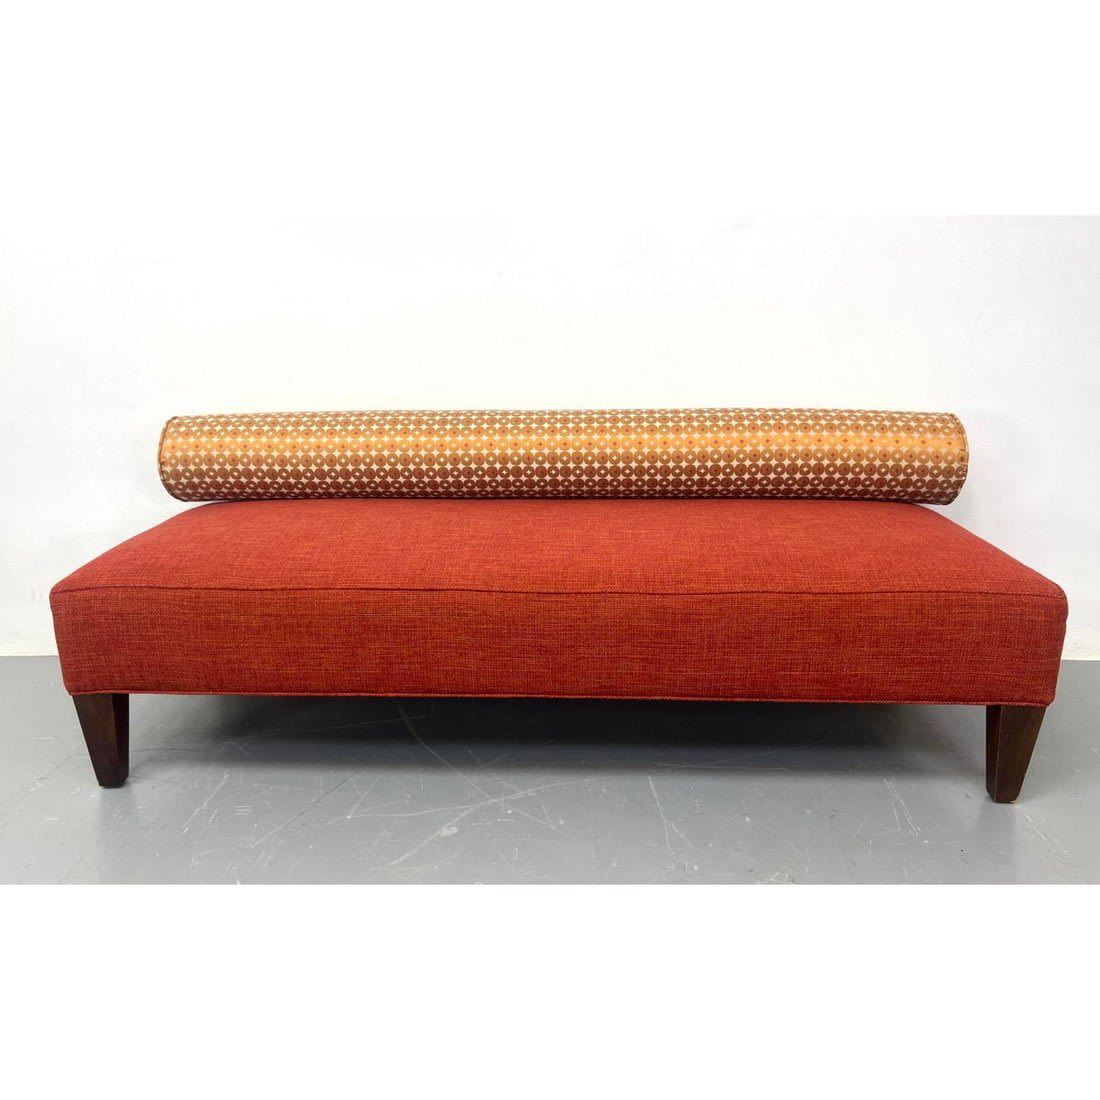 LEE Industries Day Bed Sofa. Long